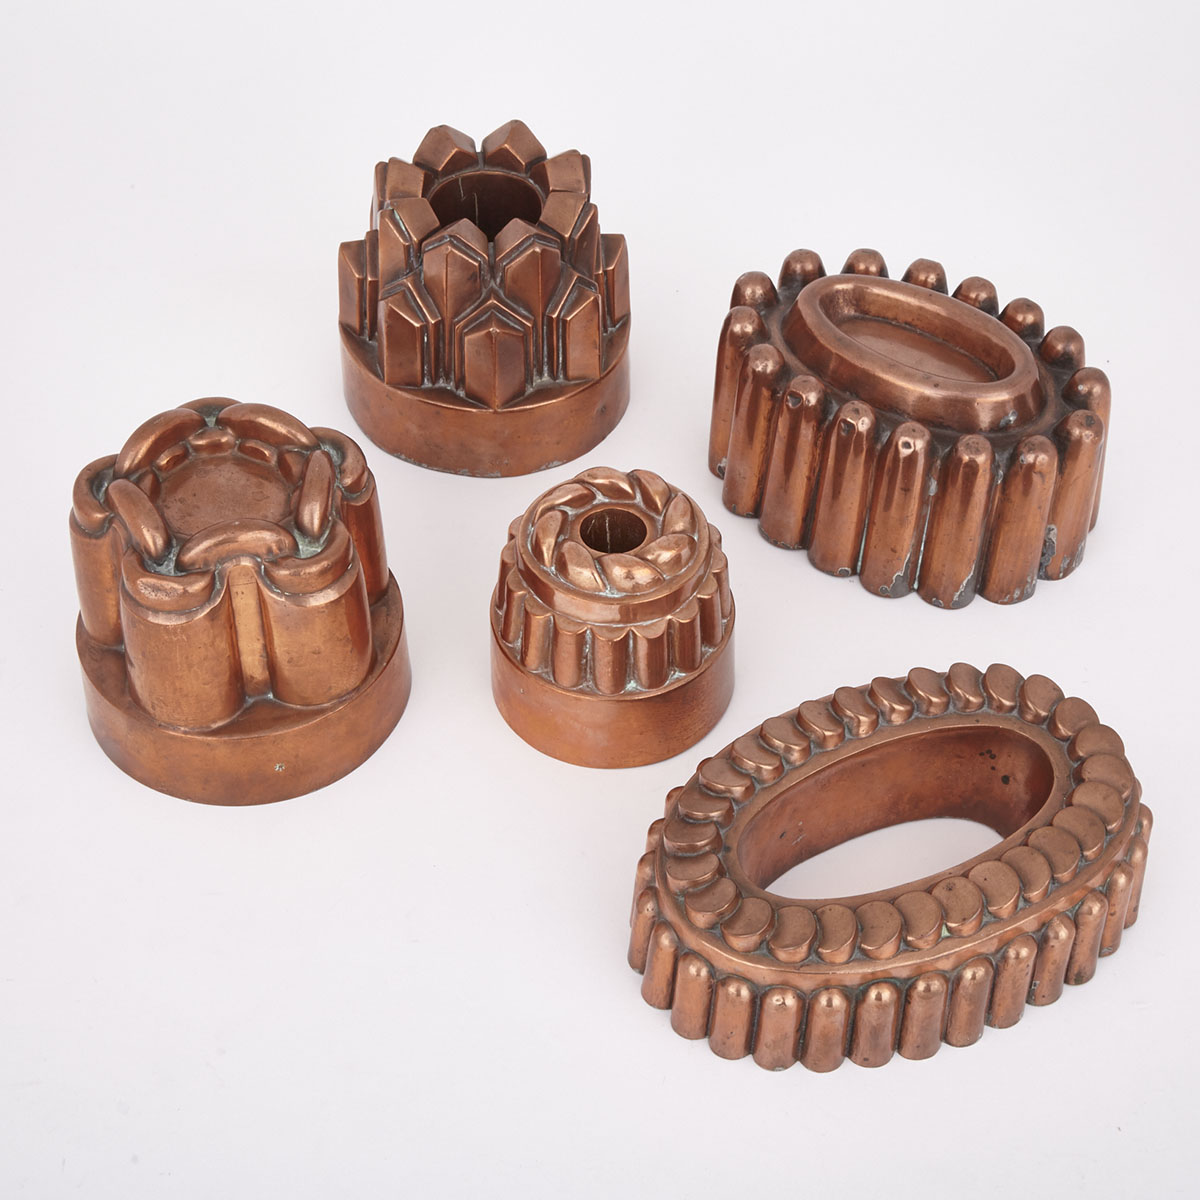 Collection of FIve English Copper Jelly Moulds, early 19th century